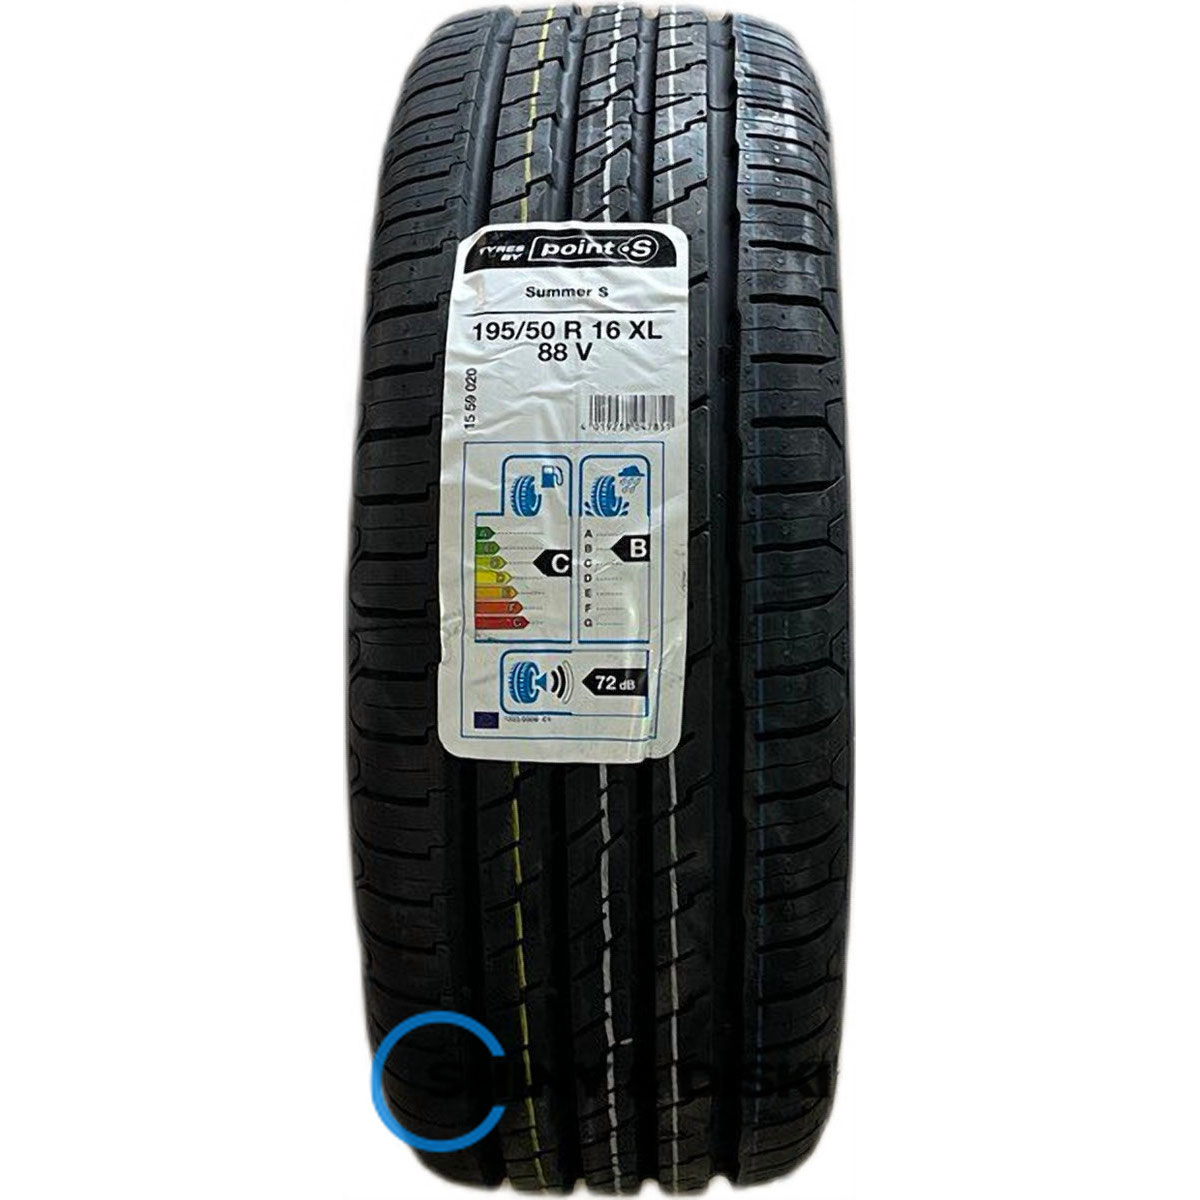 покрышки point s summer 205/60 r16 92h